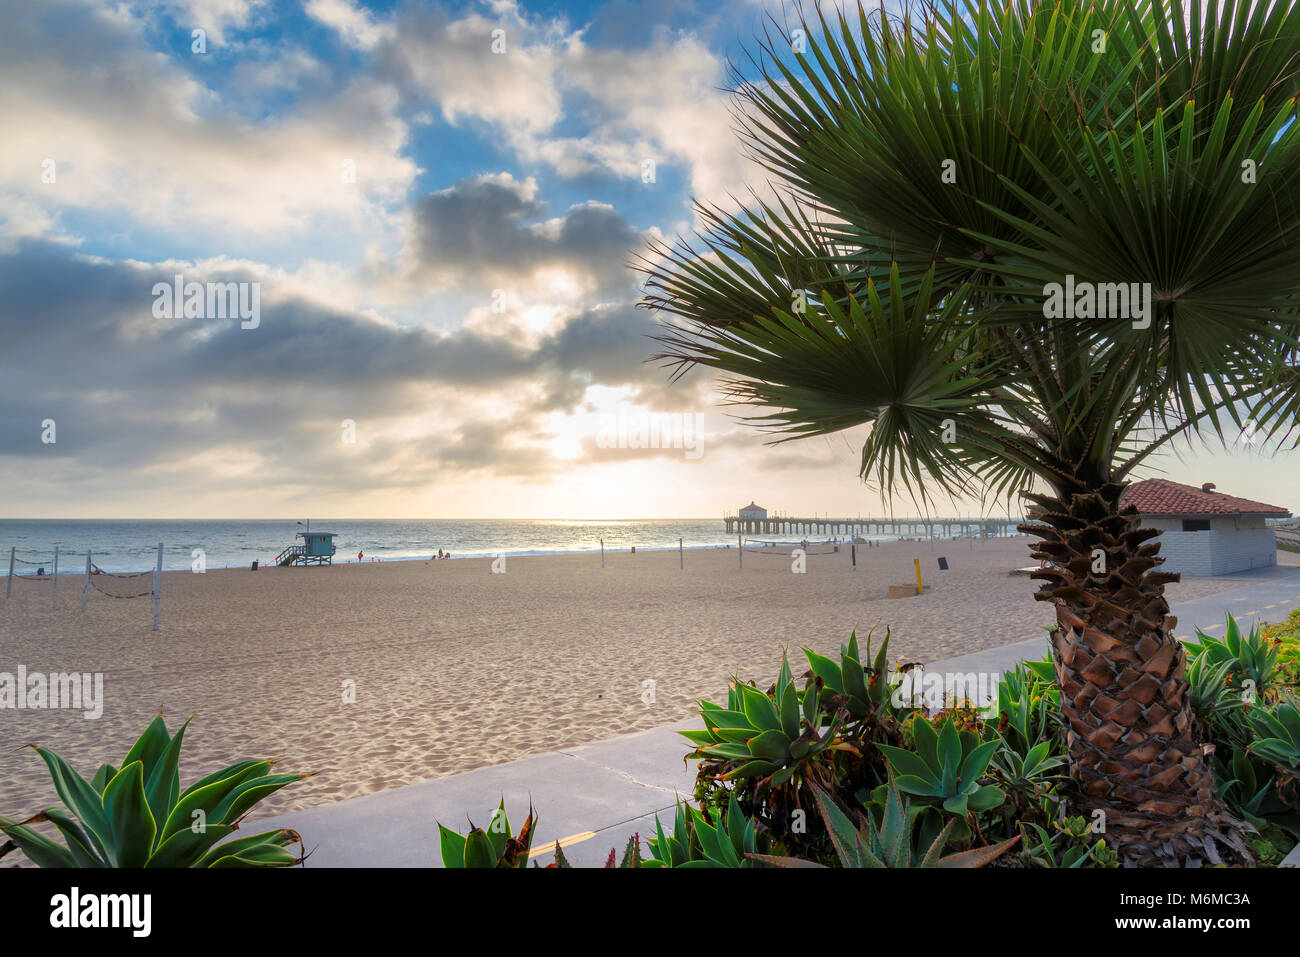 Palm trees on Manhattan beach and pier at sunset, Los Angeles, California. Stock Photo